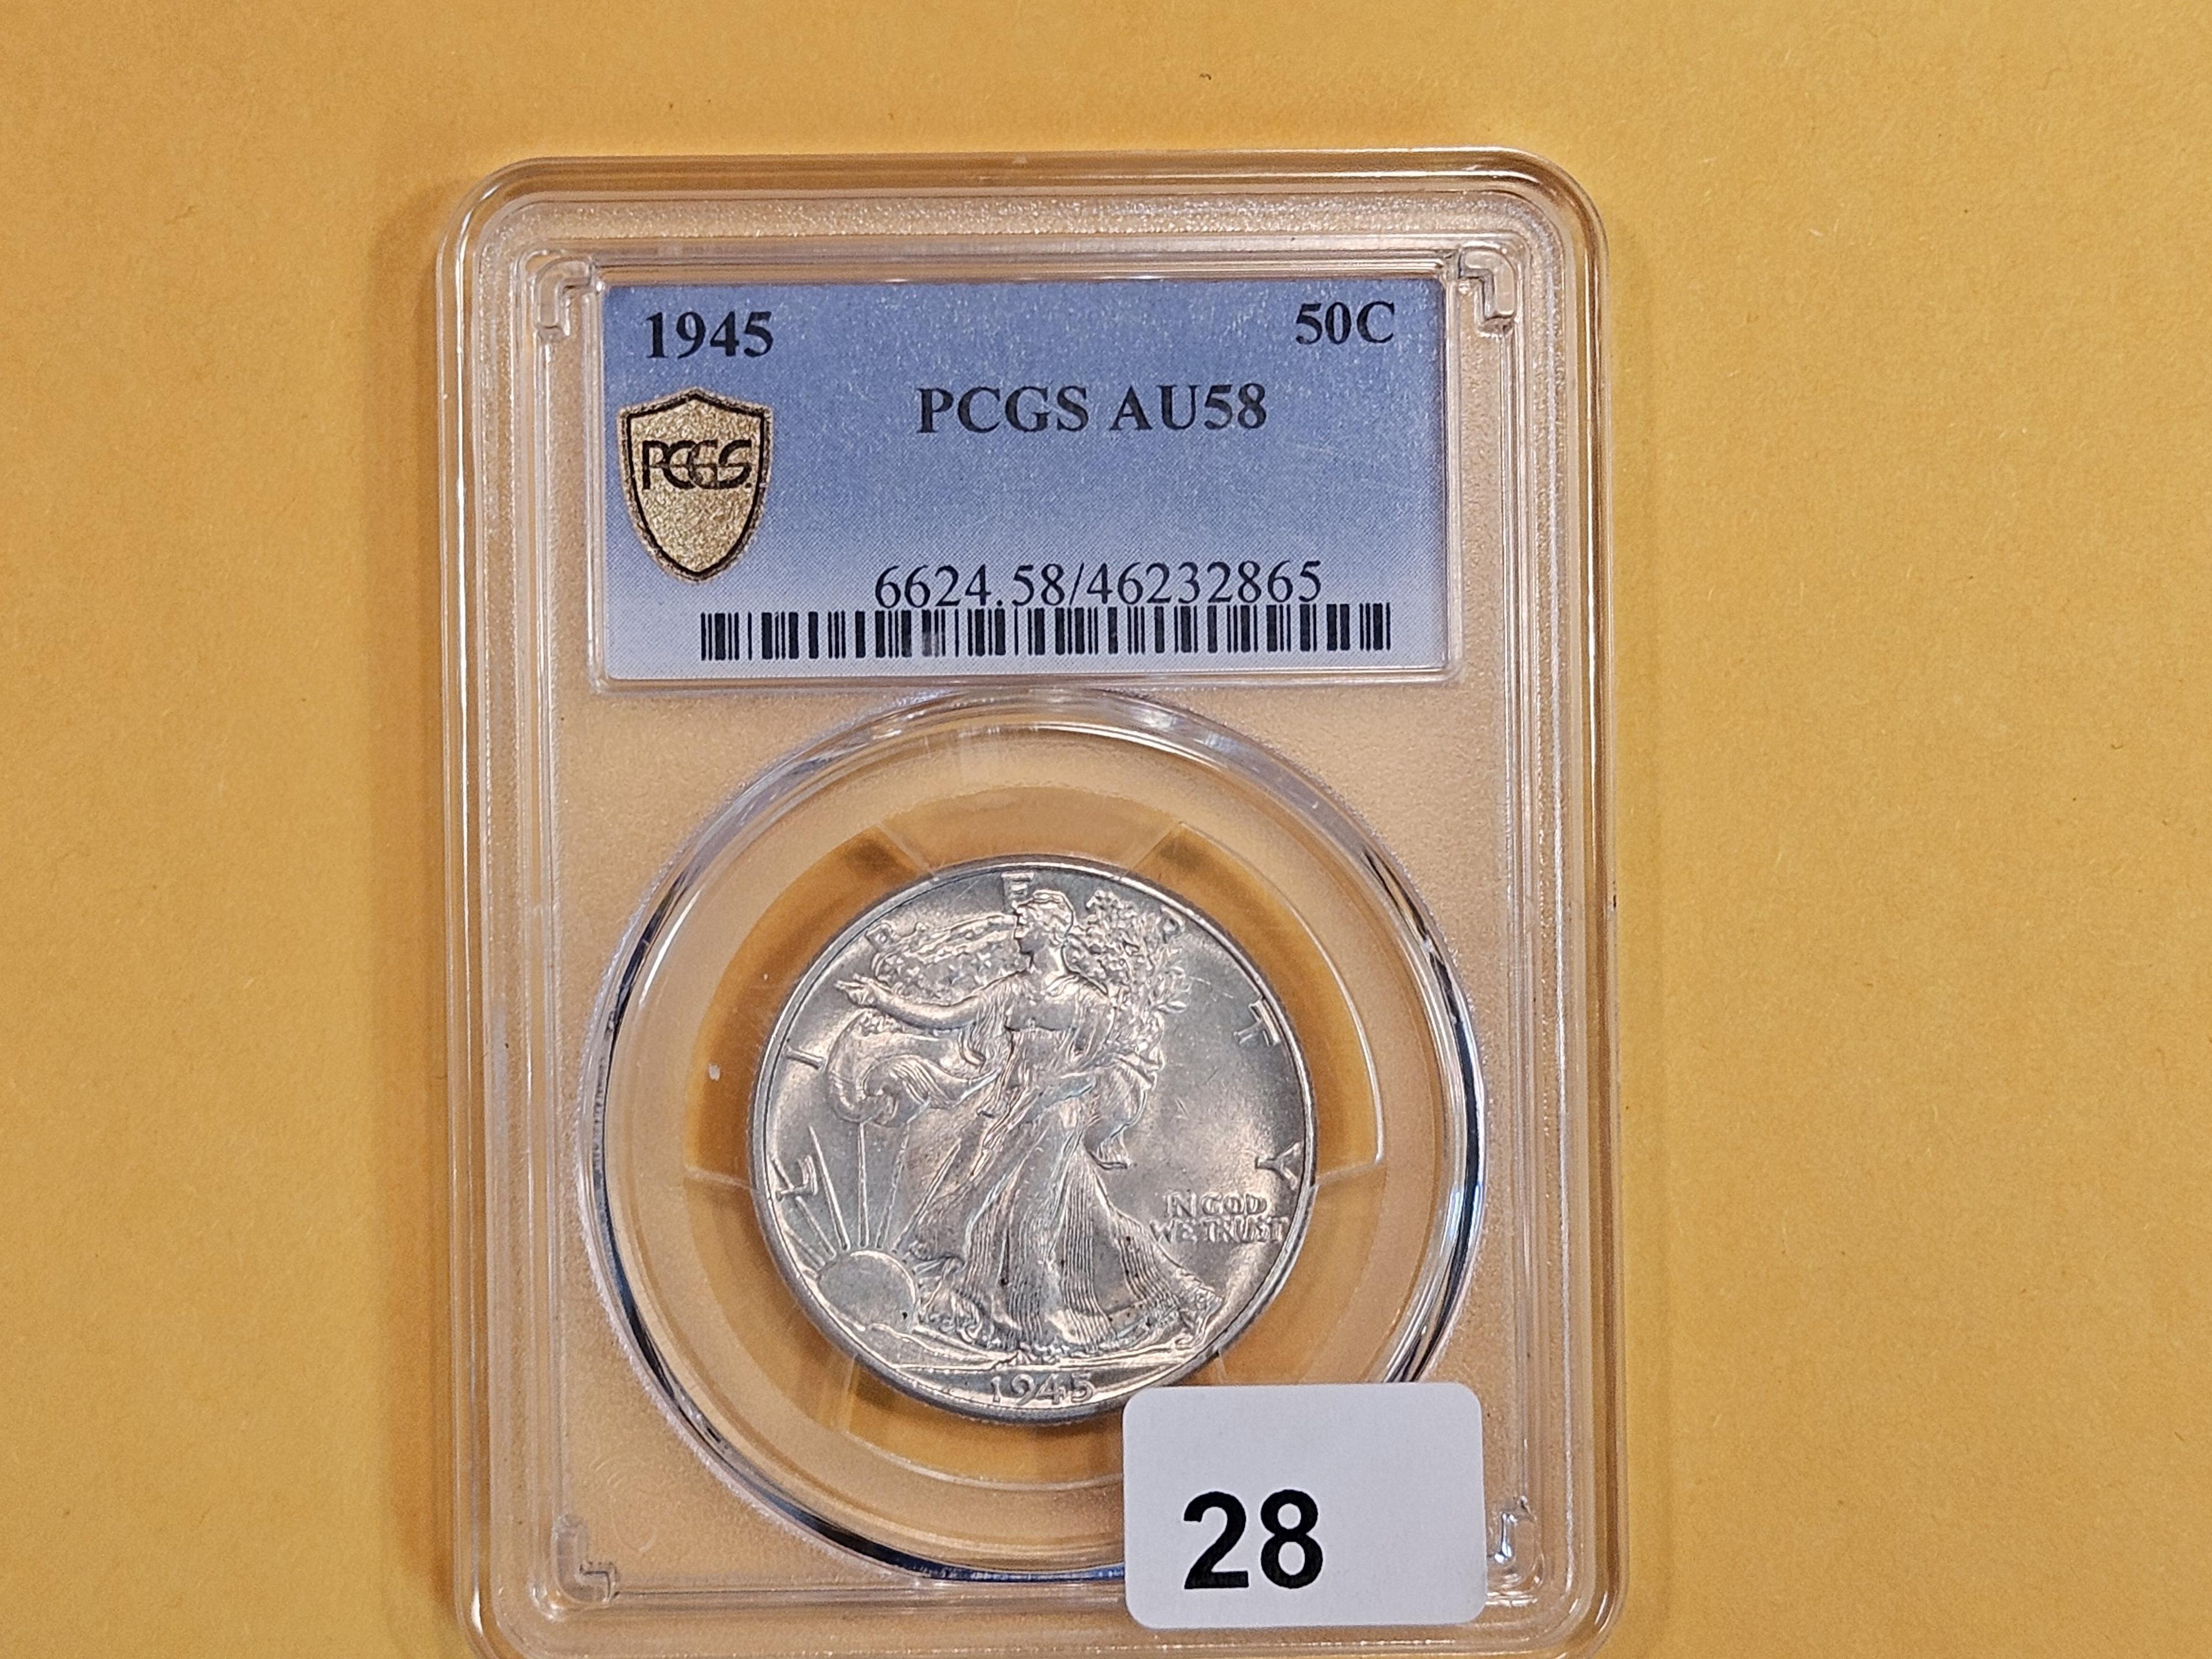 PCGS 1945 Walking Liberty Half Dollar in About Uncirculated - 58